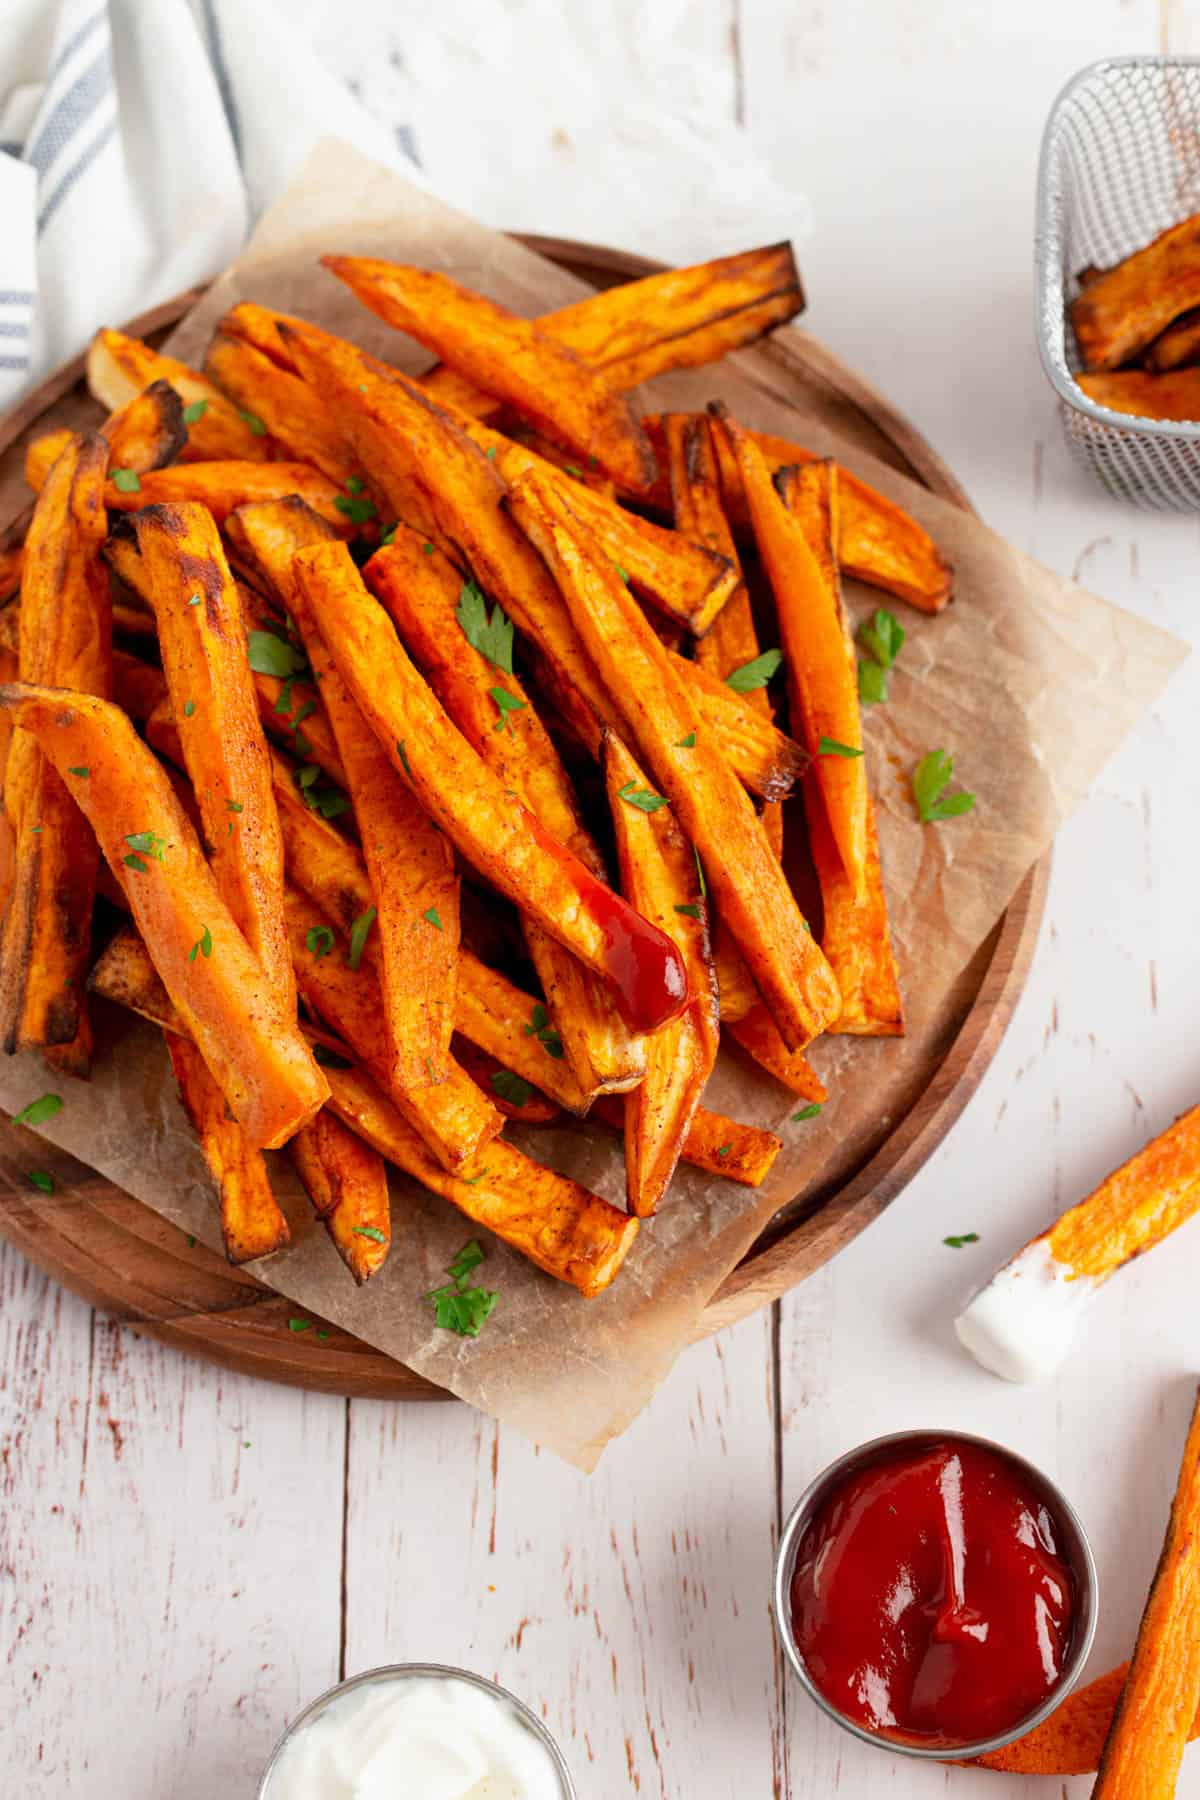 Close up view of cooked sweet potato fries, garnished with chopped cilantro and showing a few fries dipped in sauces. 